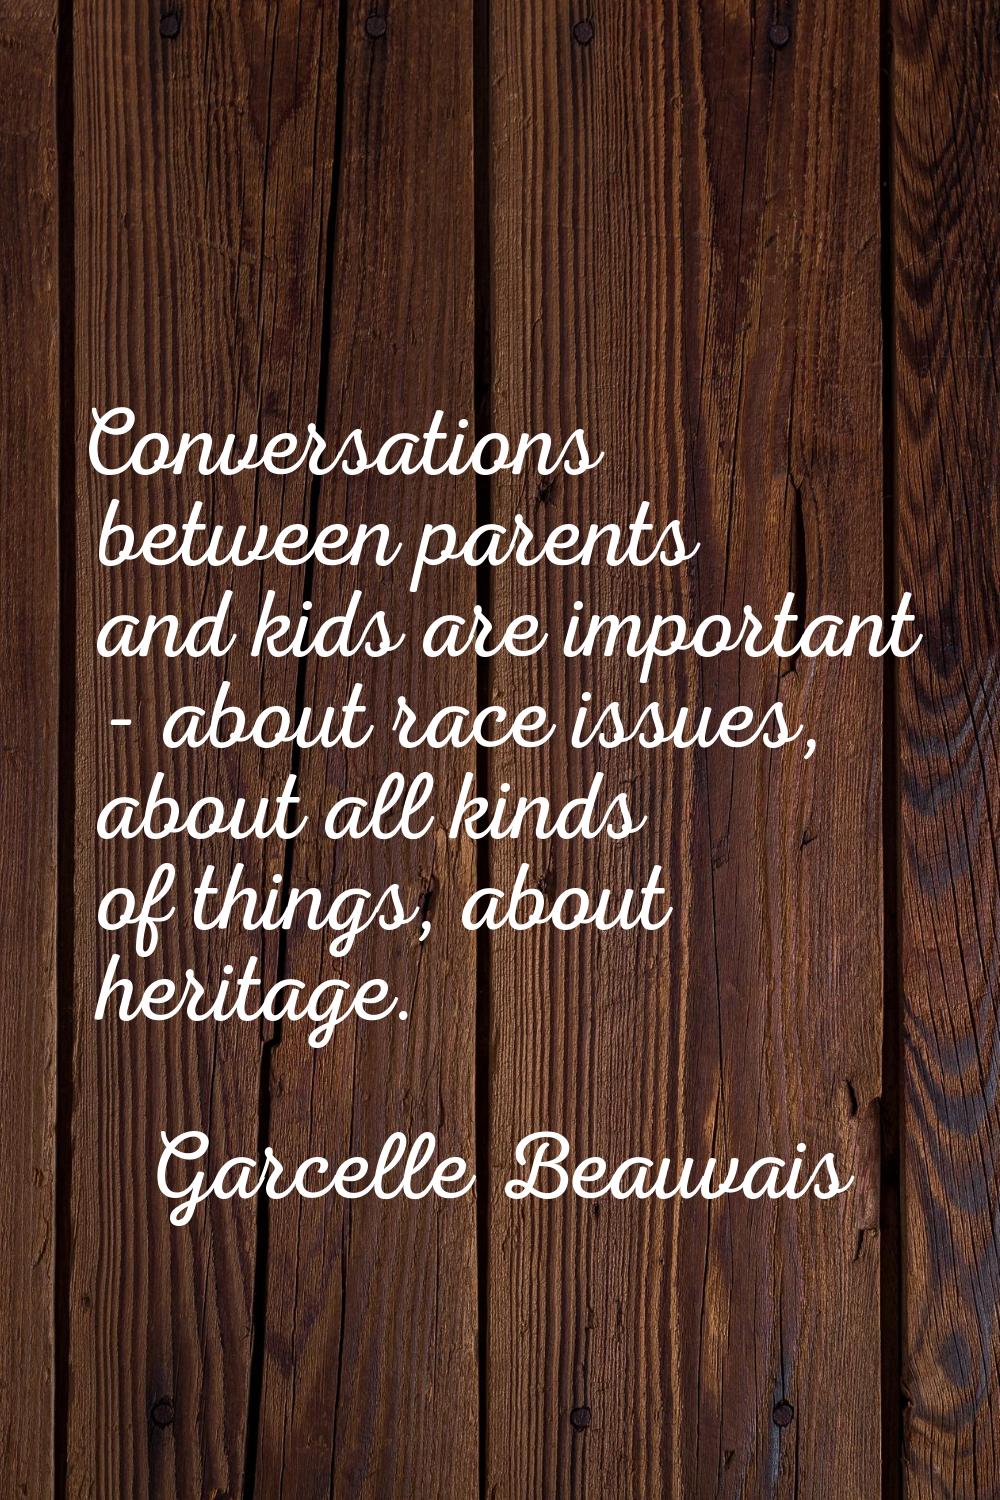 Conversations between parents and kids are important - about race issues, about all kinds of things